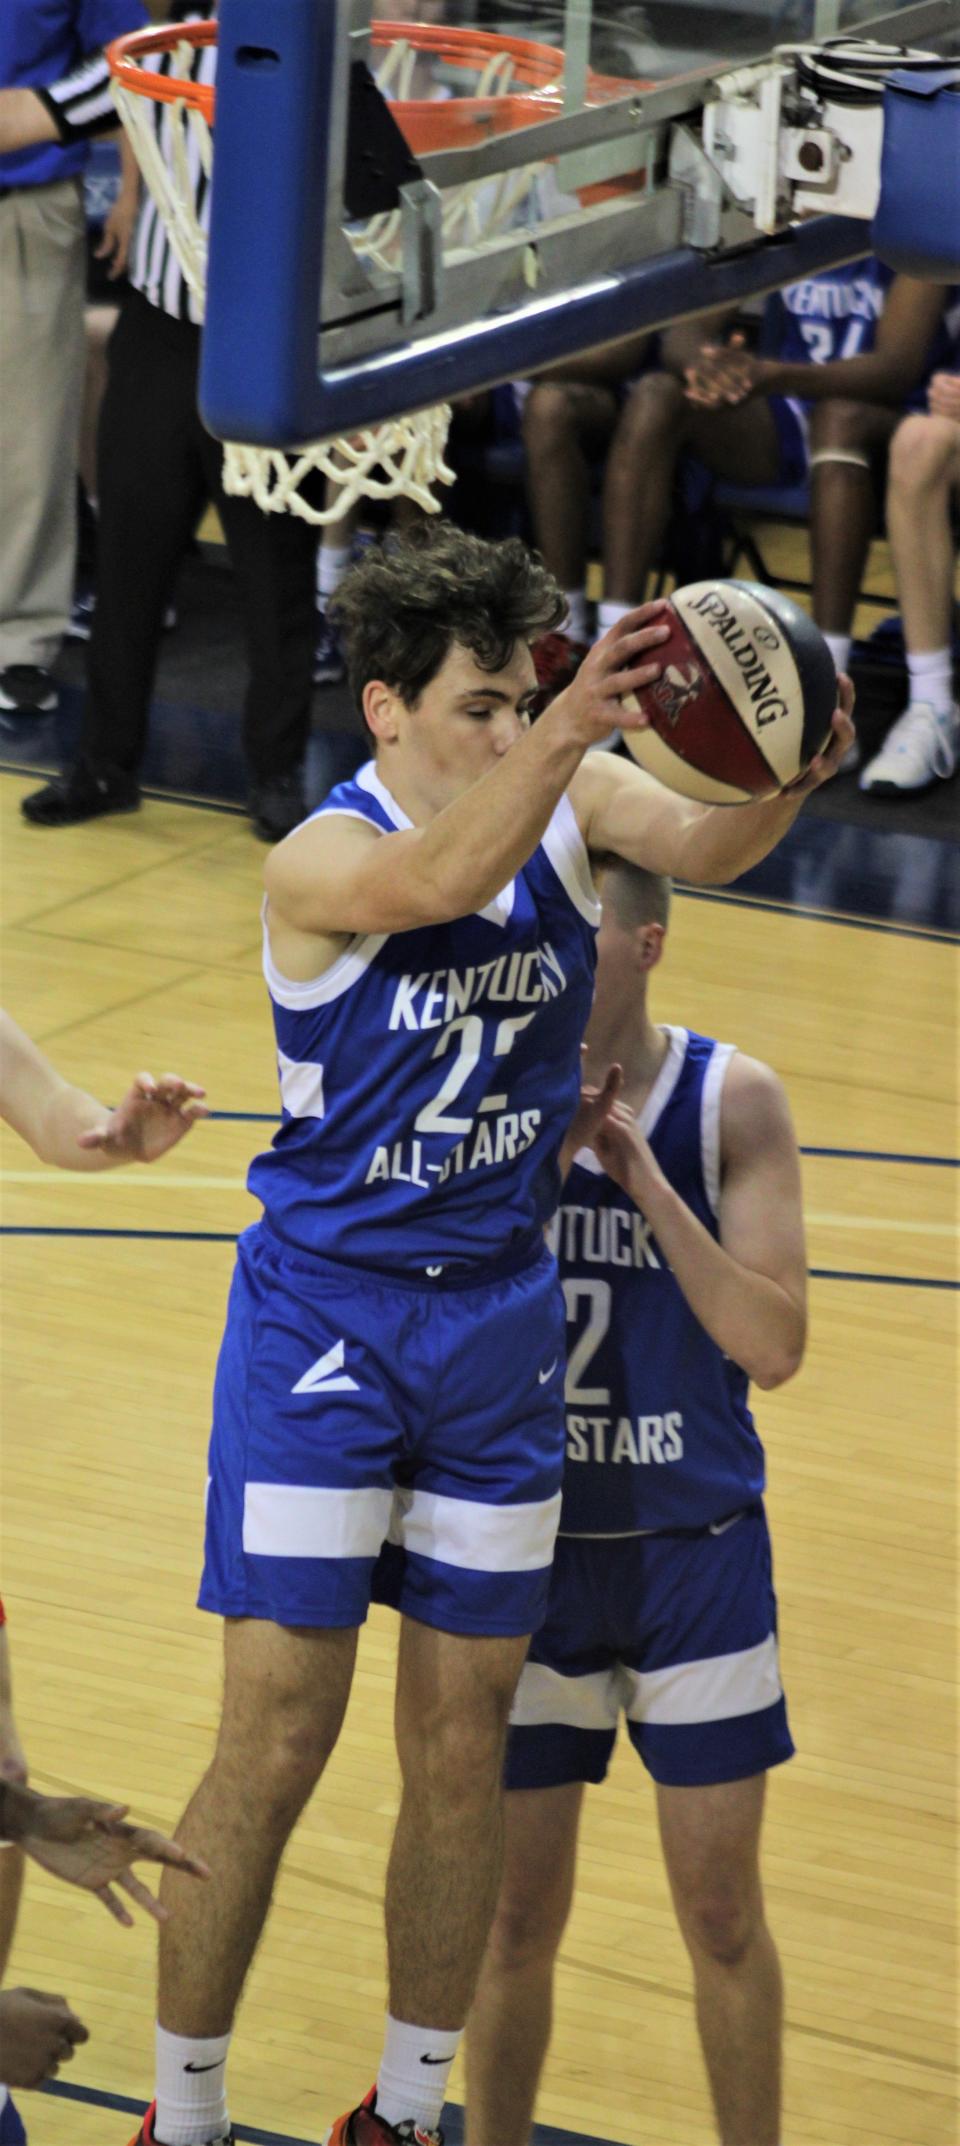 Teagan Moore of Owen County grabs a rebound as Kentucky defeated Ohio 93-83 in the boys edition of the Ohio-Kentucky All-Star Game April 8, 2023, at Thomas More University's Connor Convocation Center.